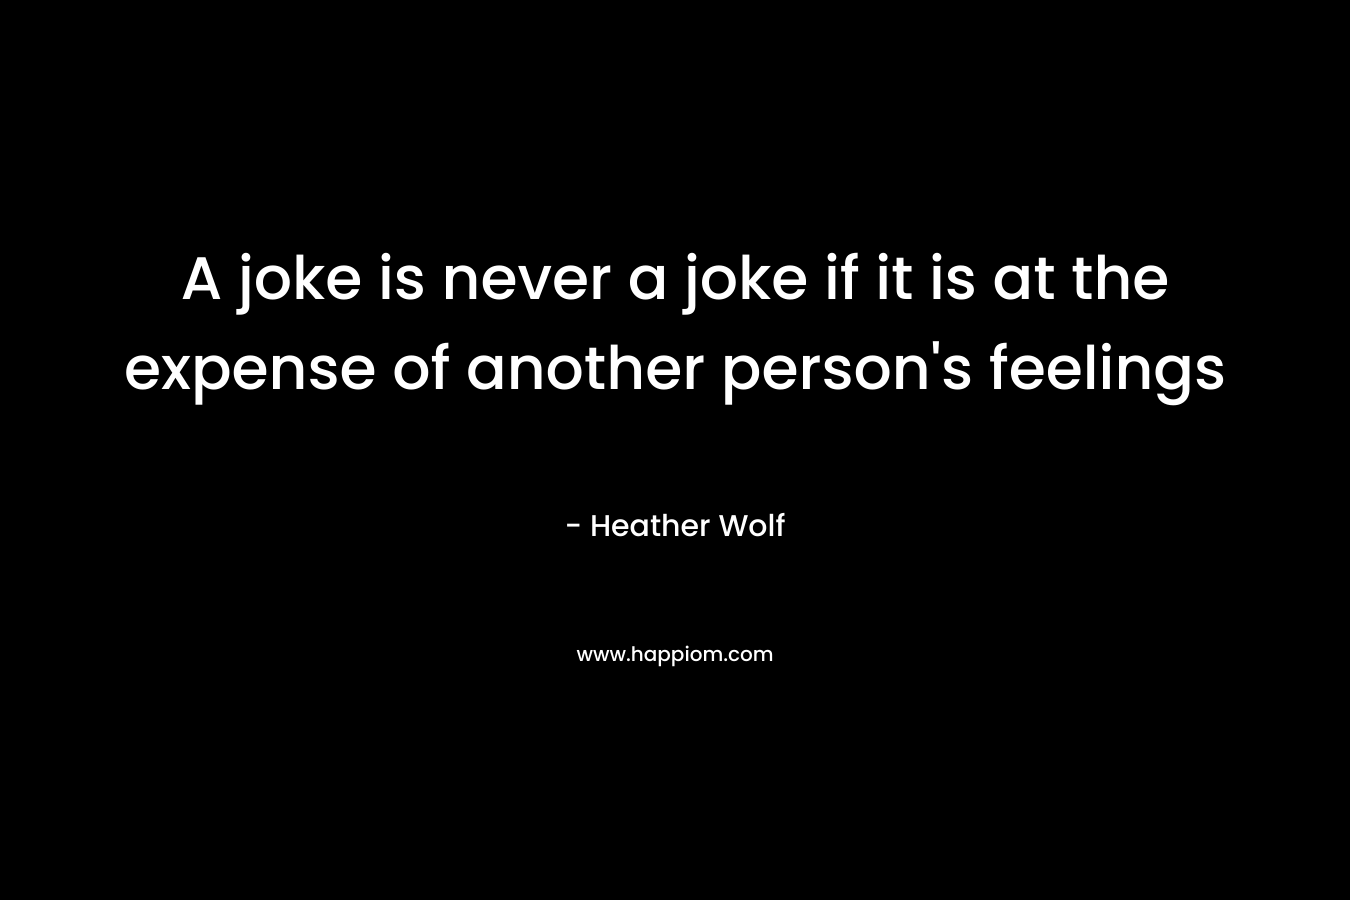 A joke is never a joke if it is at the expense of another person's feelings